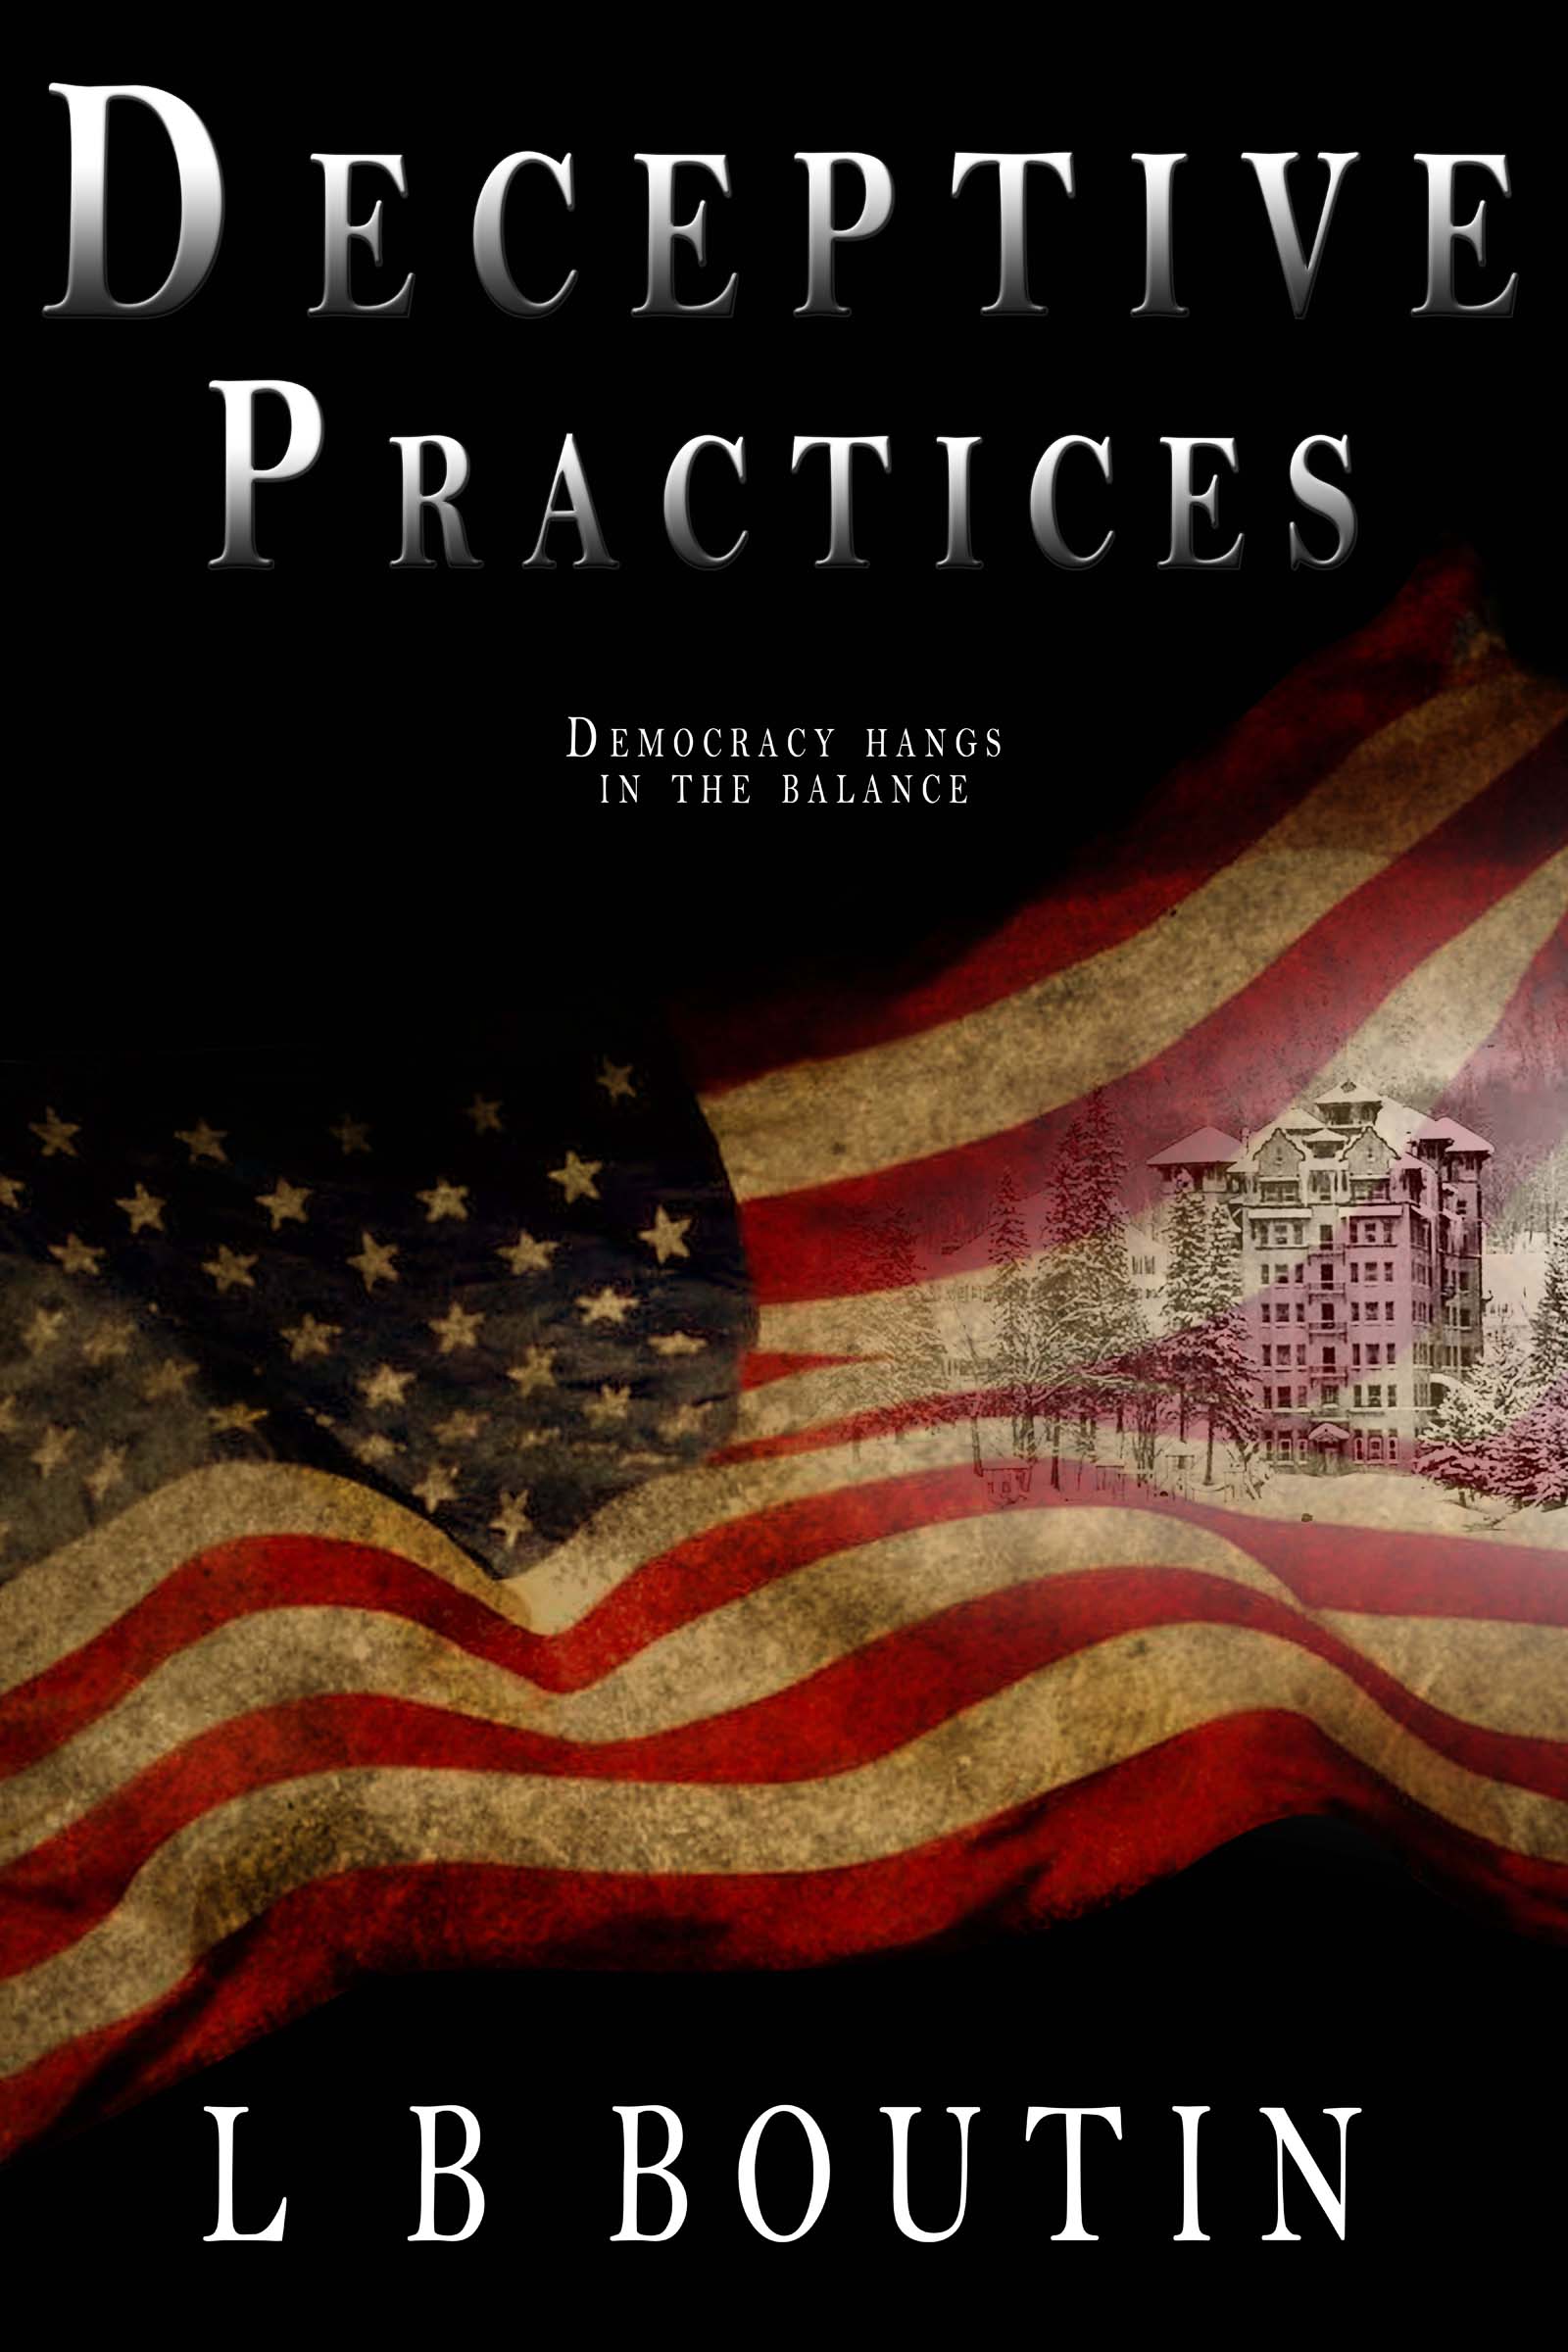 deceptive_practices_book_cover_fb.jpg